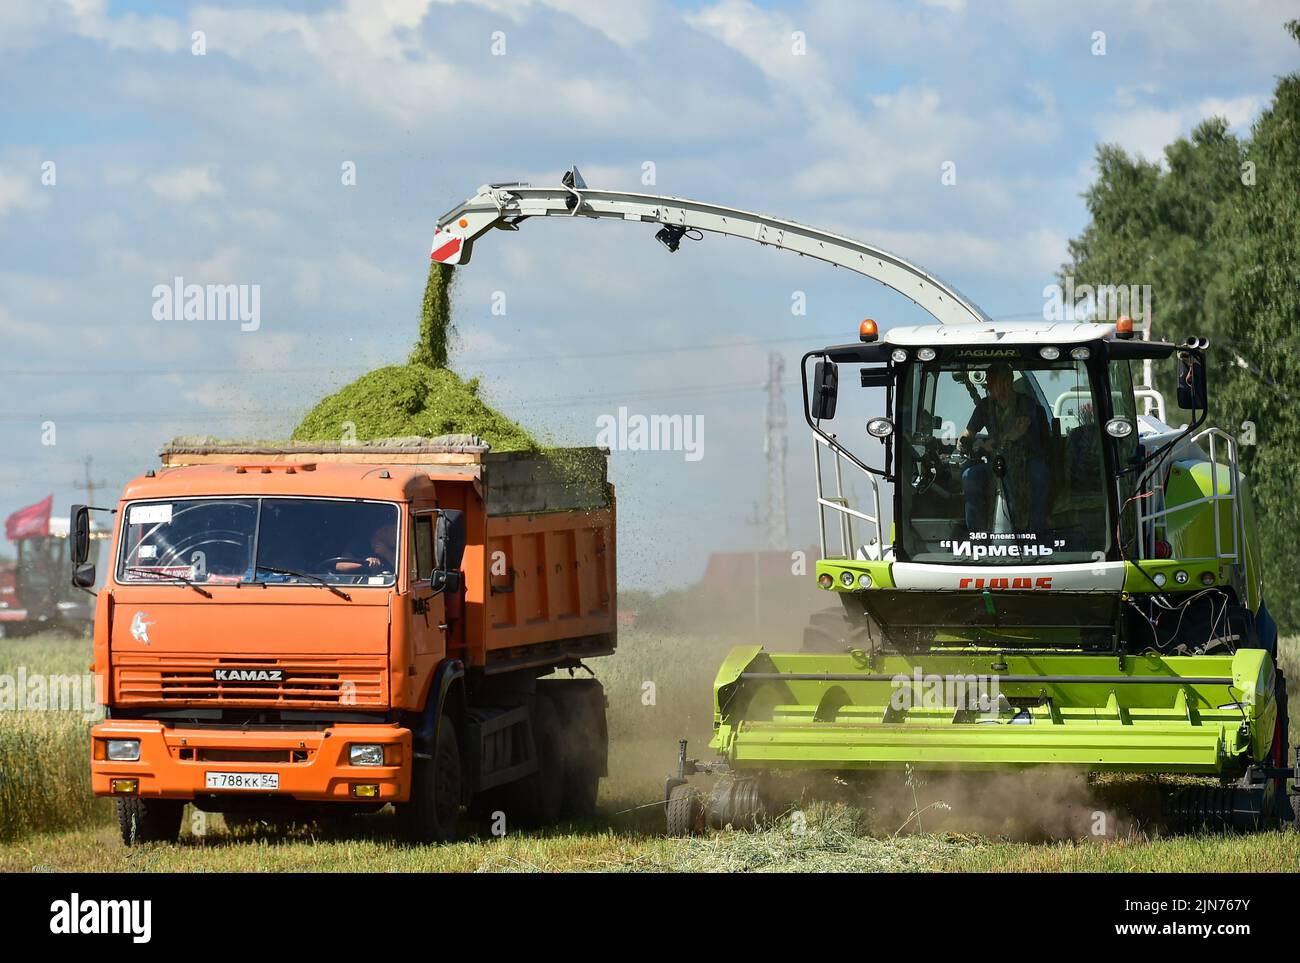 Regional demonstration site of modern technologies in agricultural production 'Field Day 2022' in Novosibirsk. Genre photography. Harvesting hay with a combine harvester from the field. 05.08.2022 Russia, Novosibirsk Photo credit: Vlad Nekrasov/Kommersant/Sipa USA Stock Photo